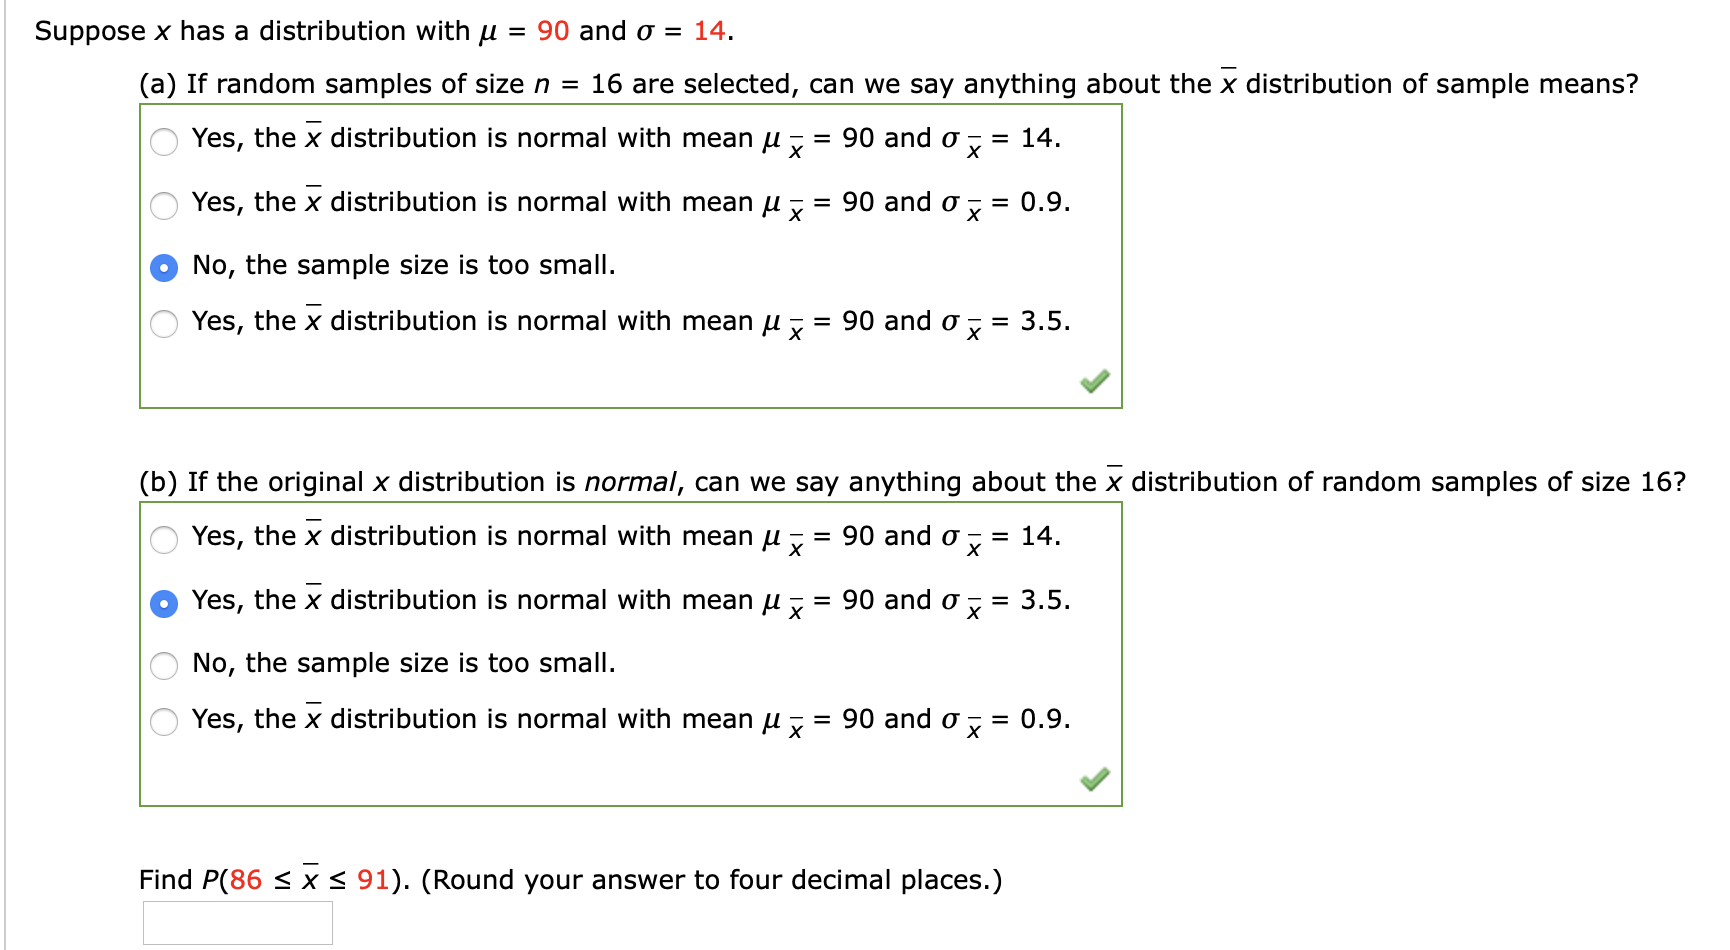 Suppose x has a distribution with u = 90 and o = 14.
(a) If random samples of size n = 16 are selected, can we say anything about the x distribution of sample means?
= 14.
х
Yes, the x distribution is normal with mean u
= 90 and o
Yes, the x distribution is normal with mean u :
90 and o
= 0.9.
х
No, the sample size is too small.
= 3.5.
х
Yes, the x distribution is normal with mean u , :
90 and o
%3D
(b) If the original x distribution is normal, can we say anything about the x distribution of random samples of size 16?
= 14.
х
Yes, the x distribution is normal with mean u , = 90 and o
Yes, the x distribution is normal with mean u ,
= 90 and o
3.5.
%3D
No, the sample size is too small.
Yes, the x distribution is normal with mean u ,
90 and o
0.9.
х
%3D
Find P(86 < x < 91). (Round your answer to four decimal places.)
